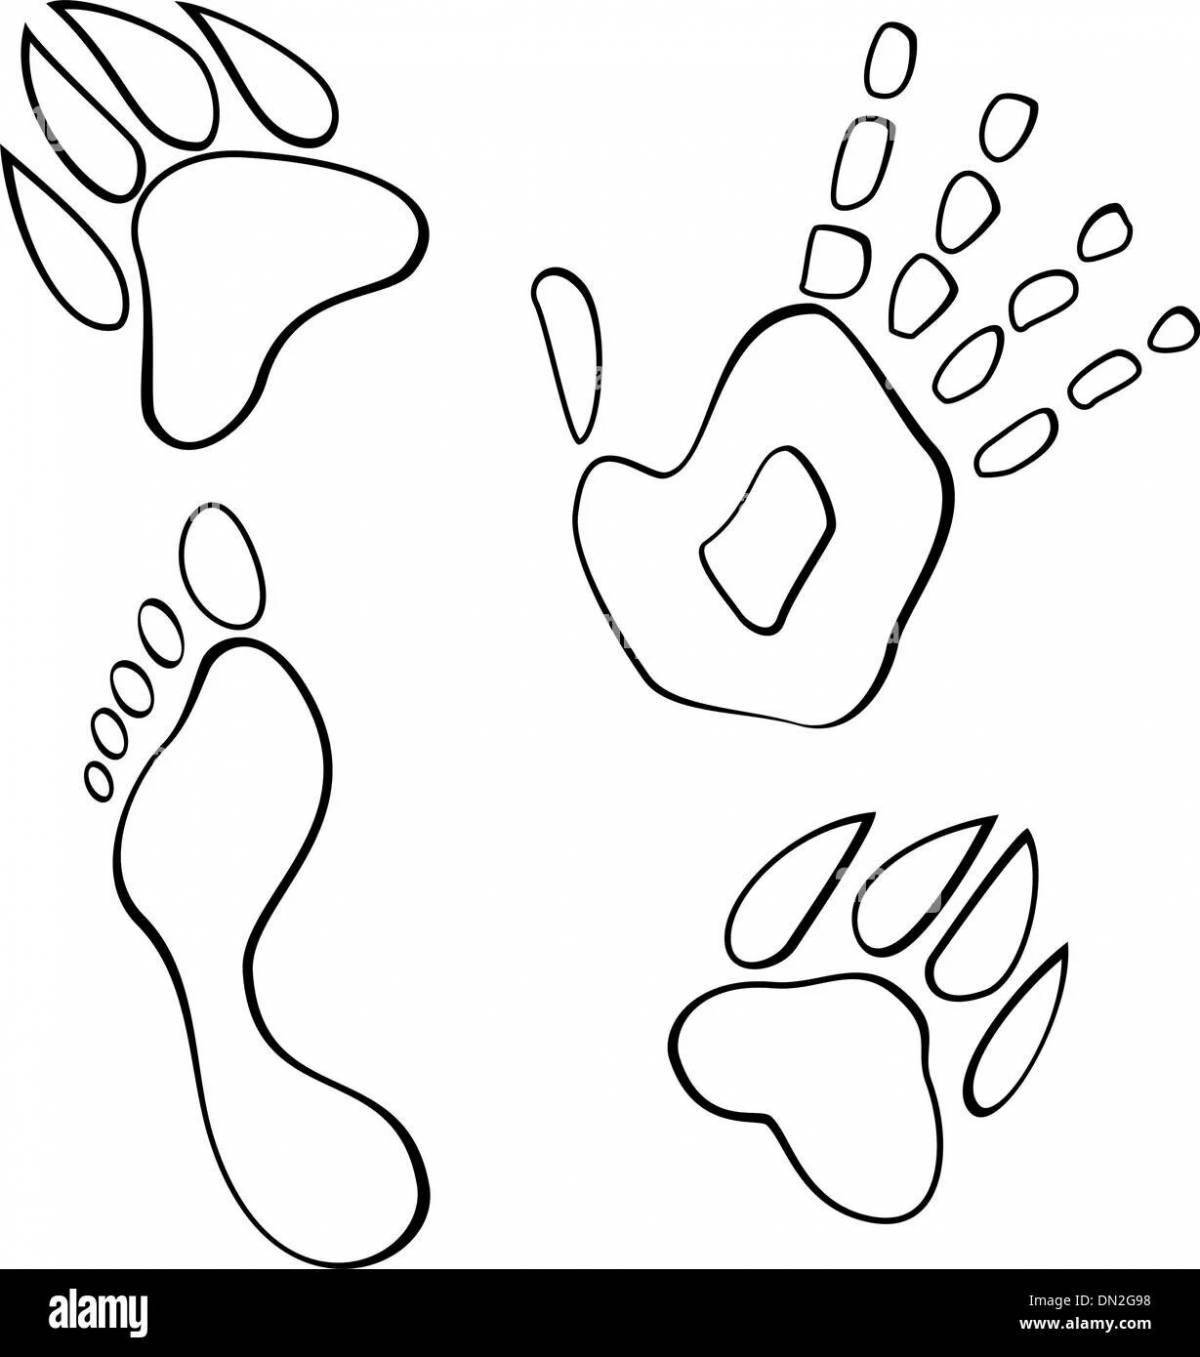 Coloring page divine footprints in the snow